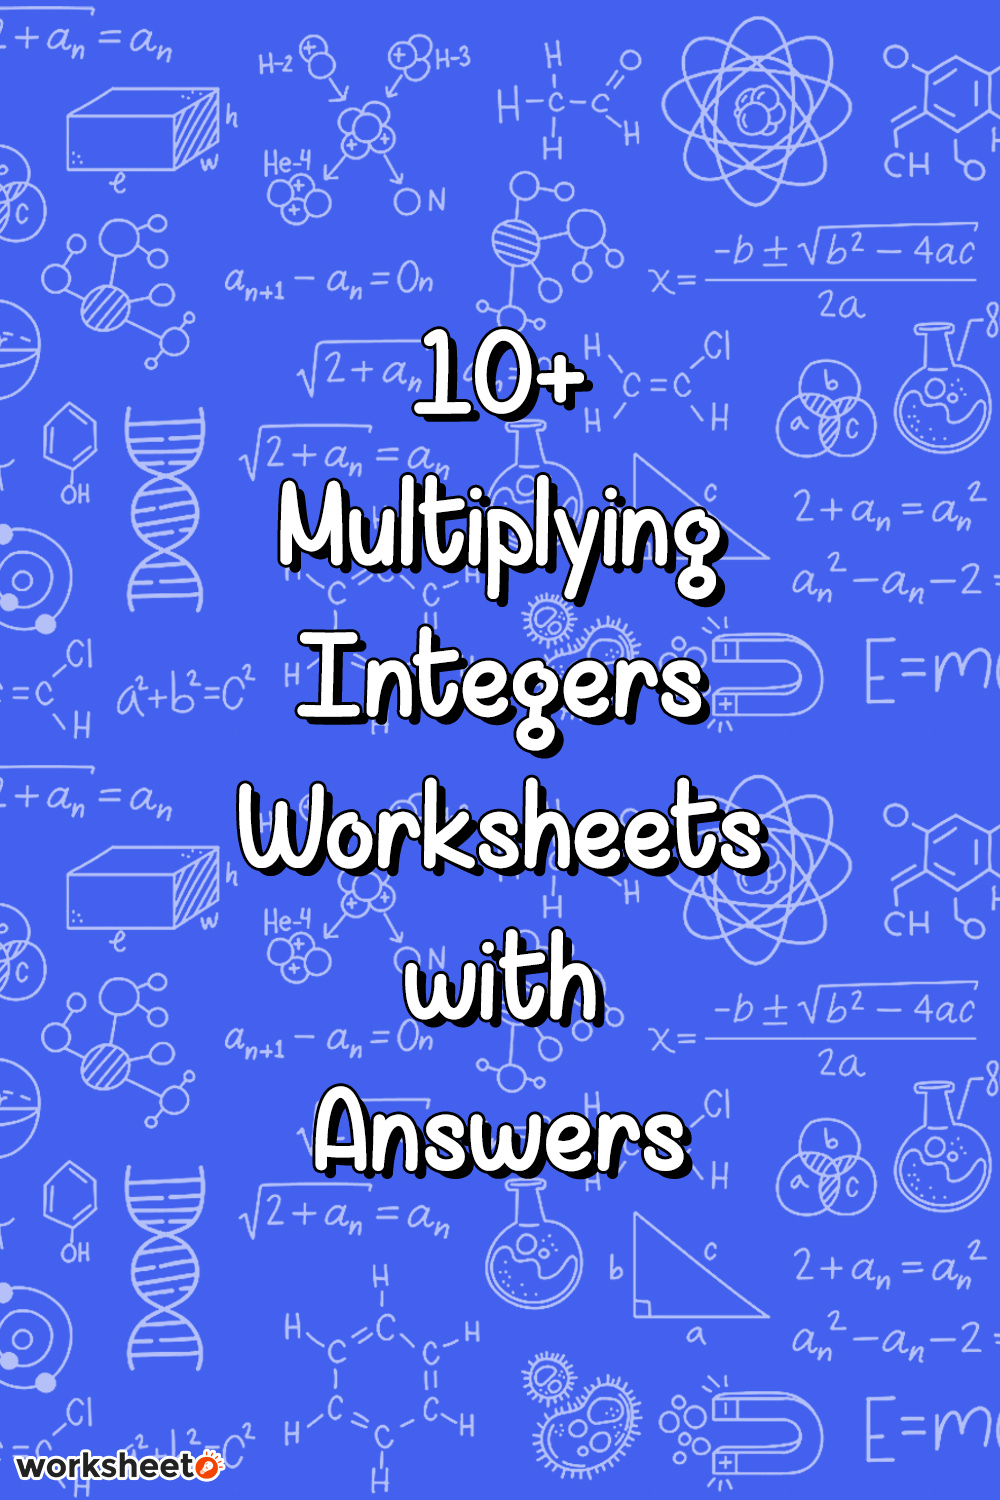 Multiplying Integers Worksheets with Answers